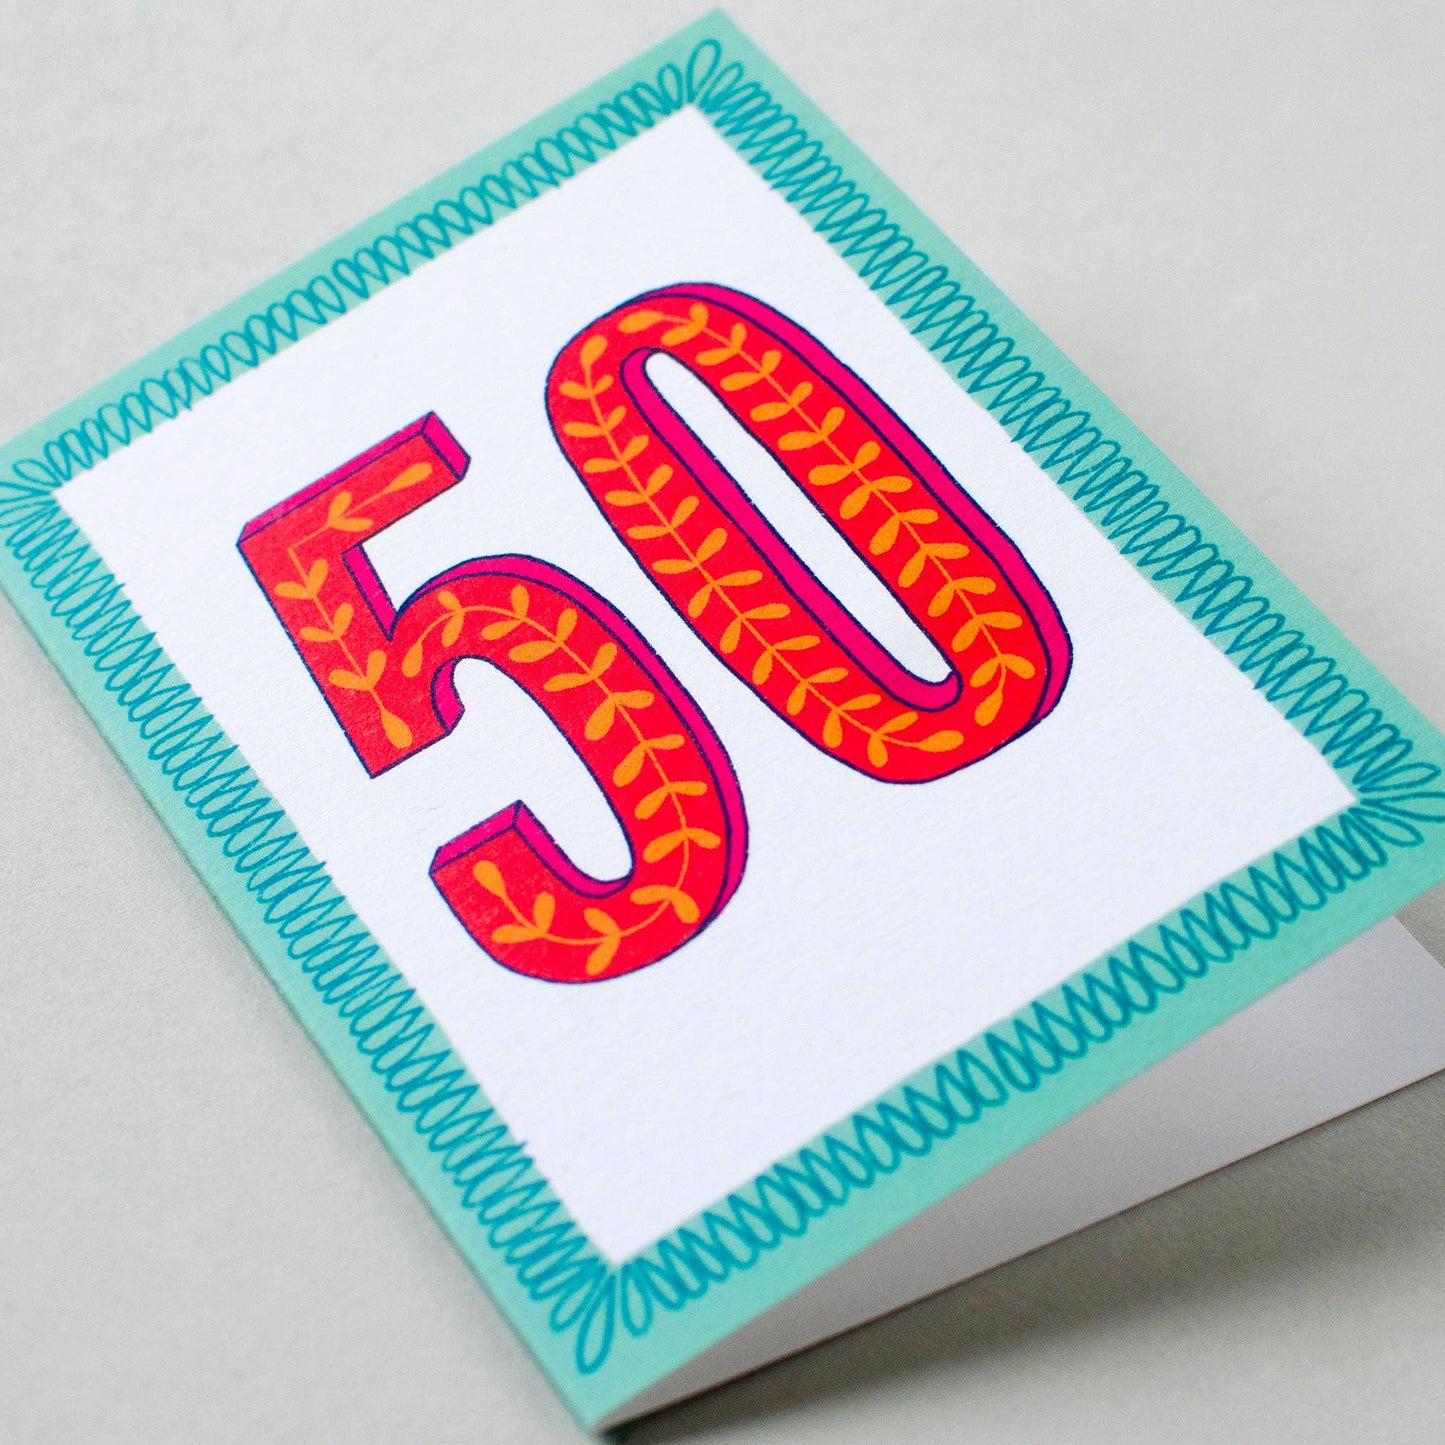 Happy 50th Birthday Greetings Card in White